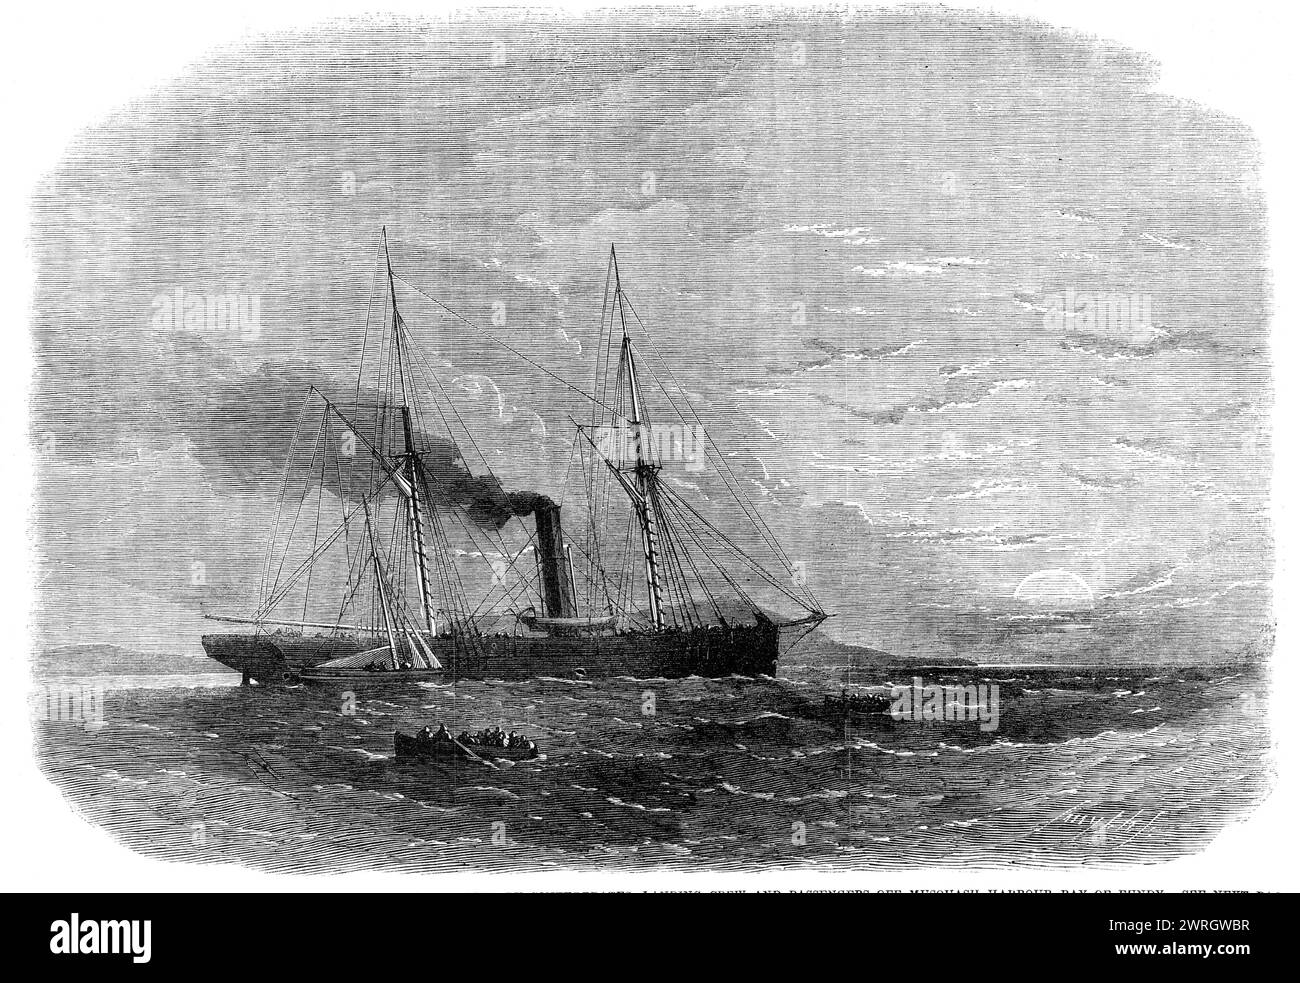 The War in America: the Federal steamer Chesapeake, seized by Confederates, landing crew and passengers off Musquash Harbour, Bay of Fundy, 1864. Engraving from a sketch by Mr. Charles C. Ward. '...when about twenty miles N.N.E. of Cape Cod, [the Chesapeake, Captain Willet] was seized by a party of Confederates...The second engineer, who was in charge of the engine at the time, was shot dead and his body thrown overboard. The first engineer was wounded by a ball in the chin, and was kept on board to work the engine...After the crew had been overpowered, the vessel was taken charge of by the Co Stock Photo